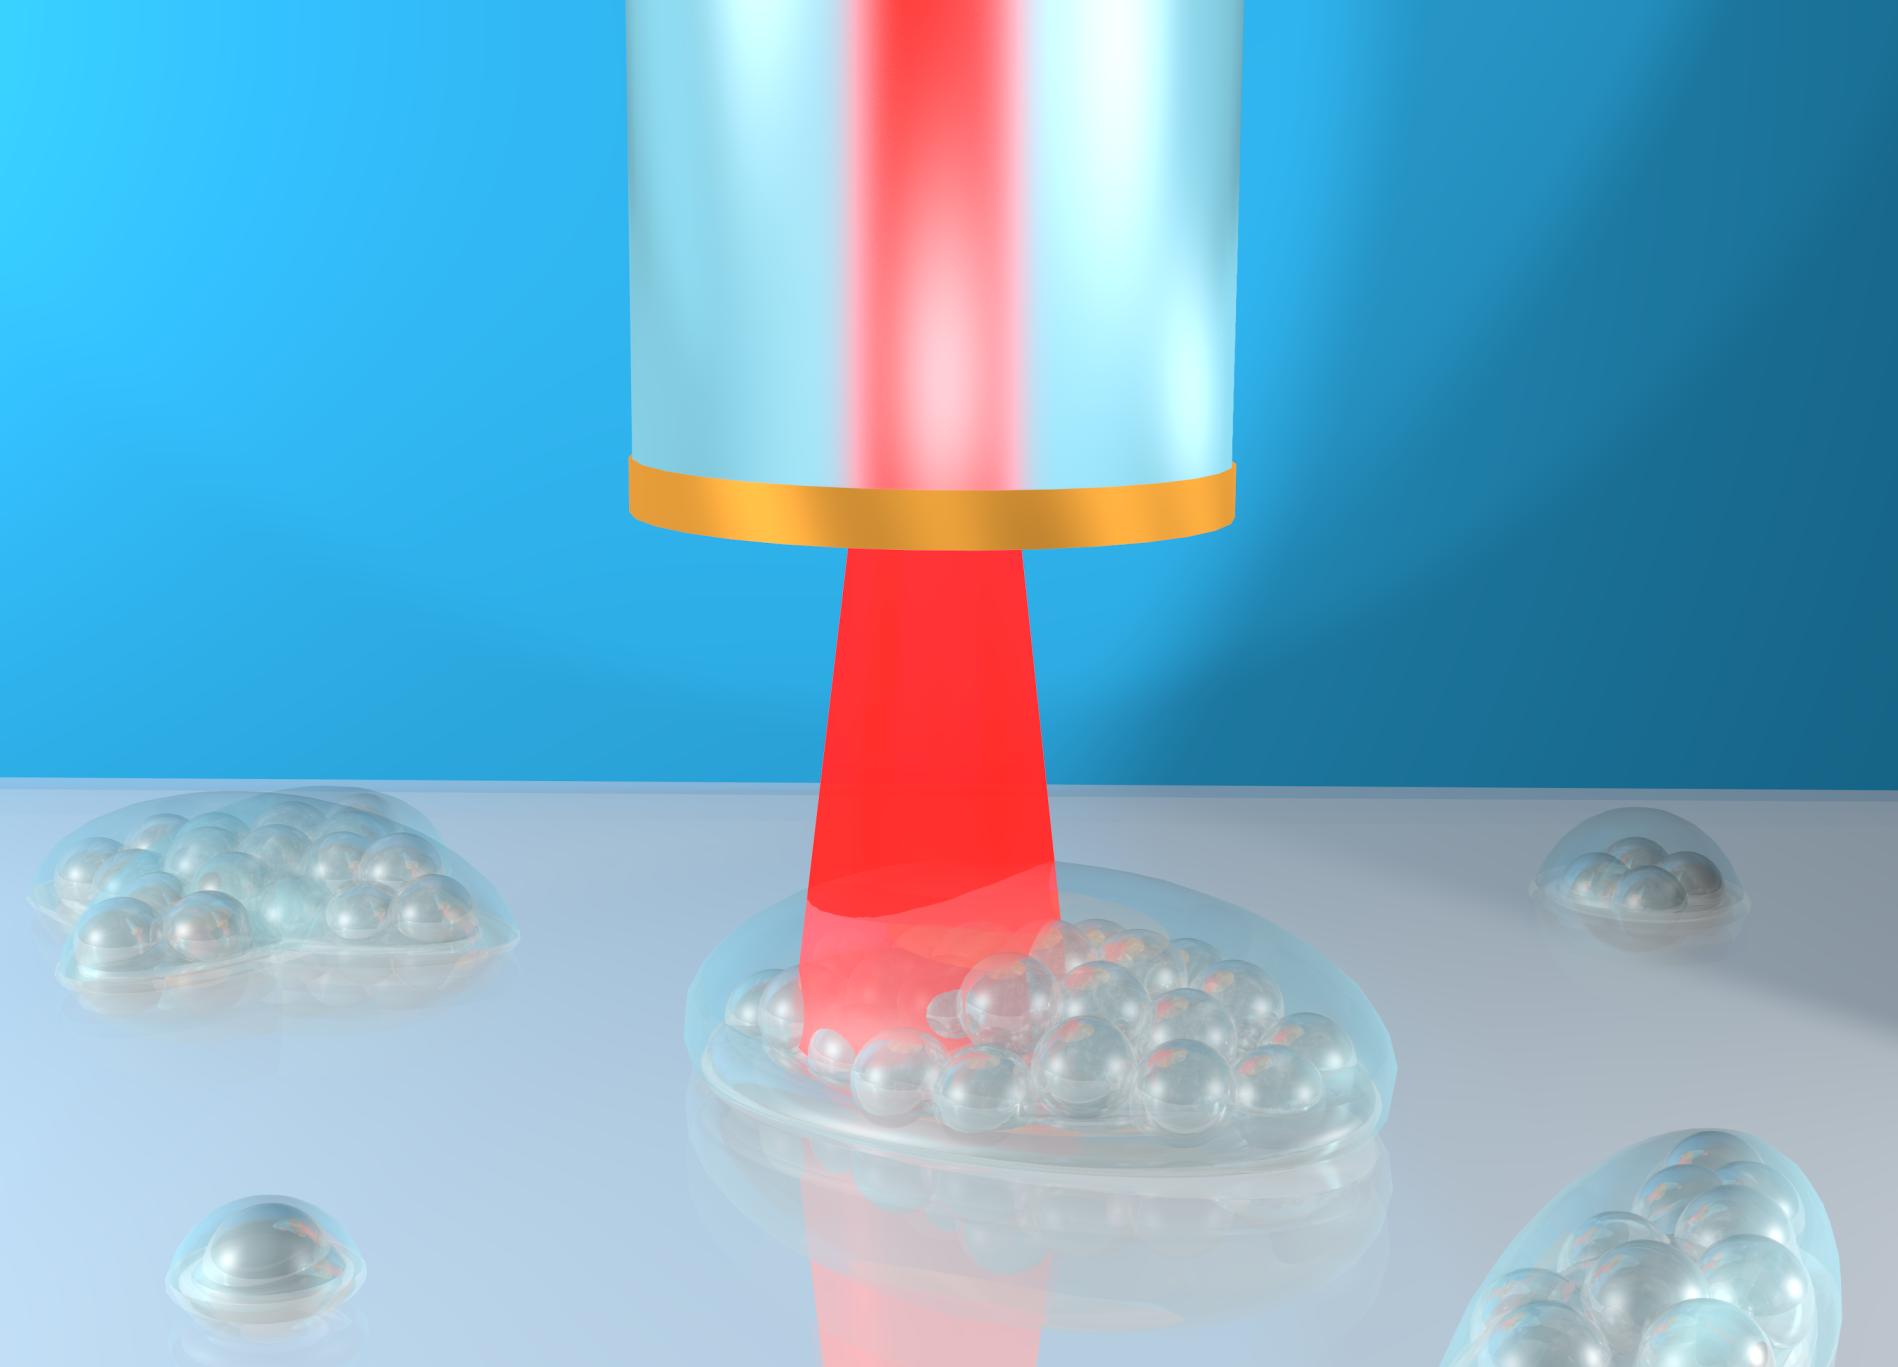 Concept art showing the 3D mapping of microscopic objects by the phonon probe system. The optical fibre contains a metal layer on its tip and projects red laser light into the specimen.